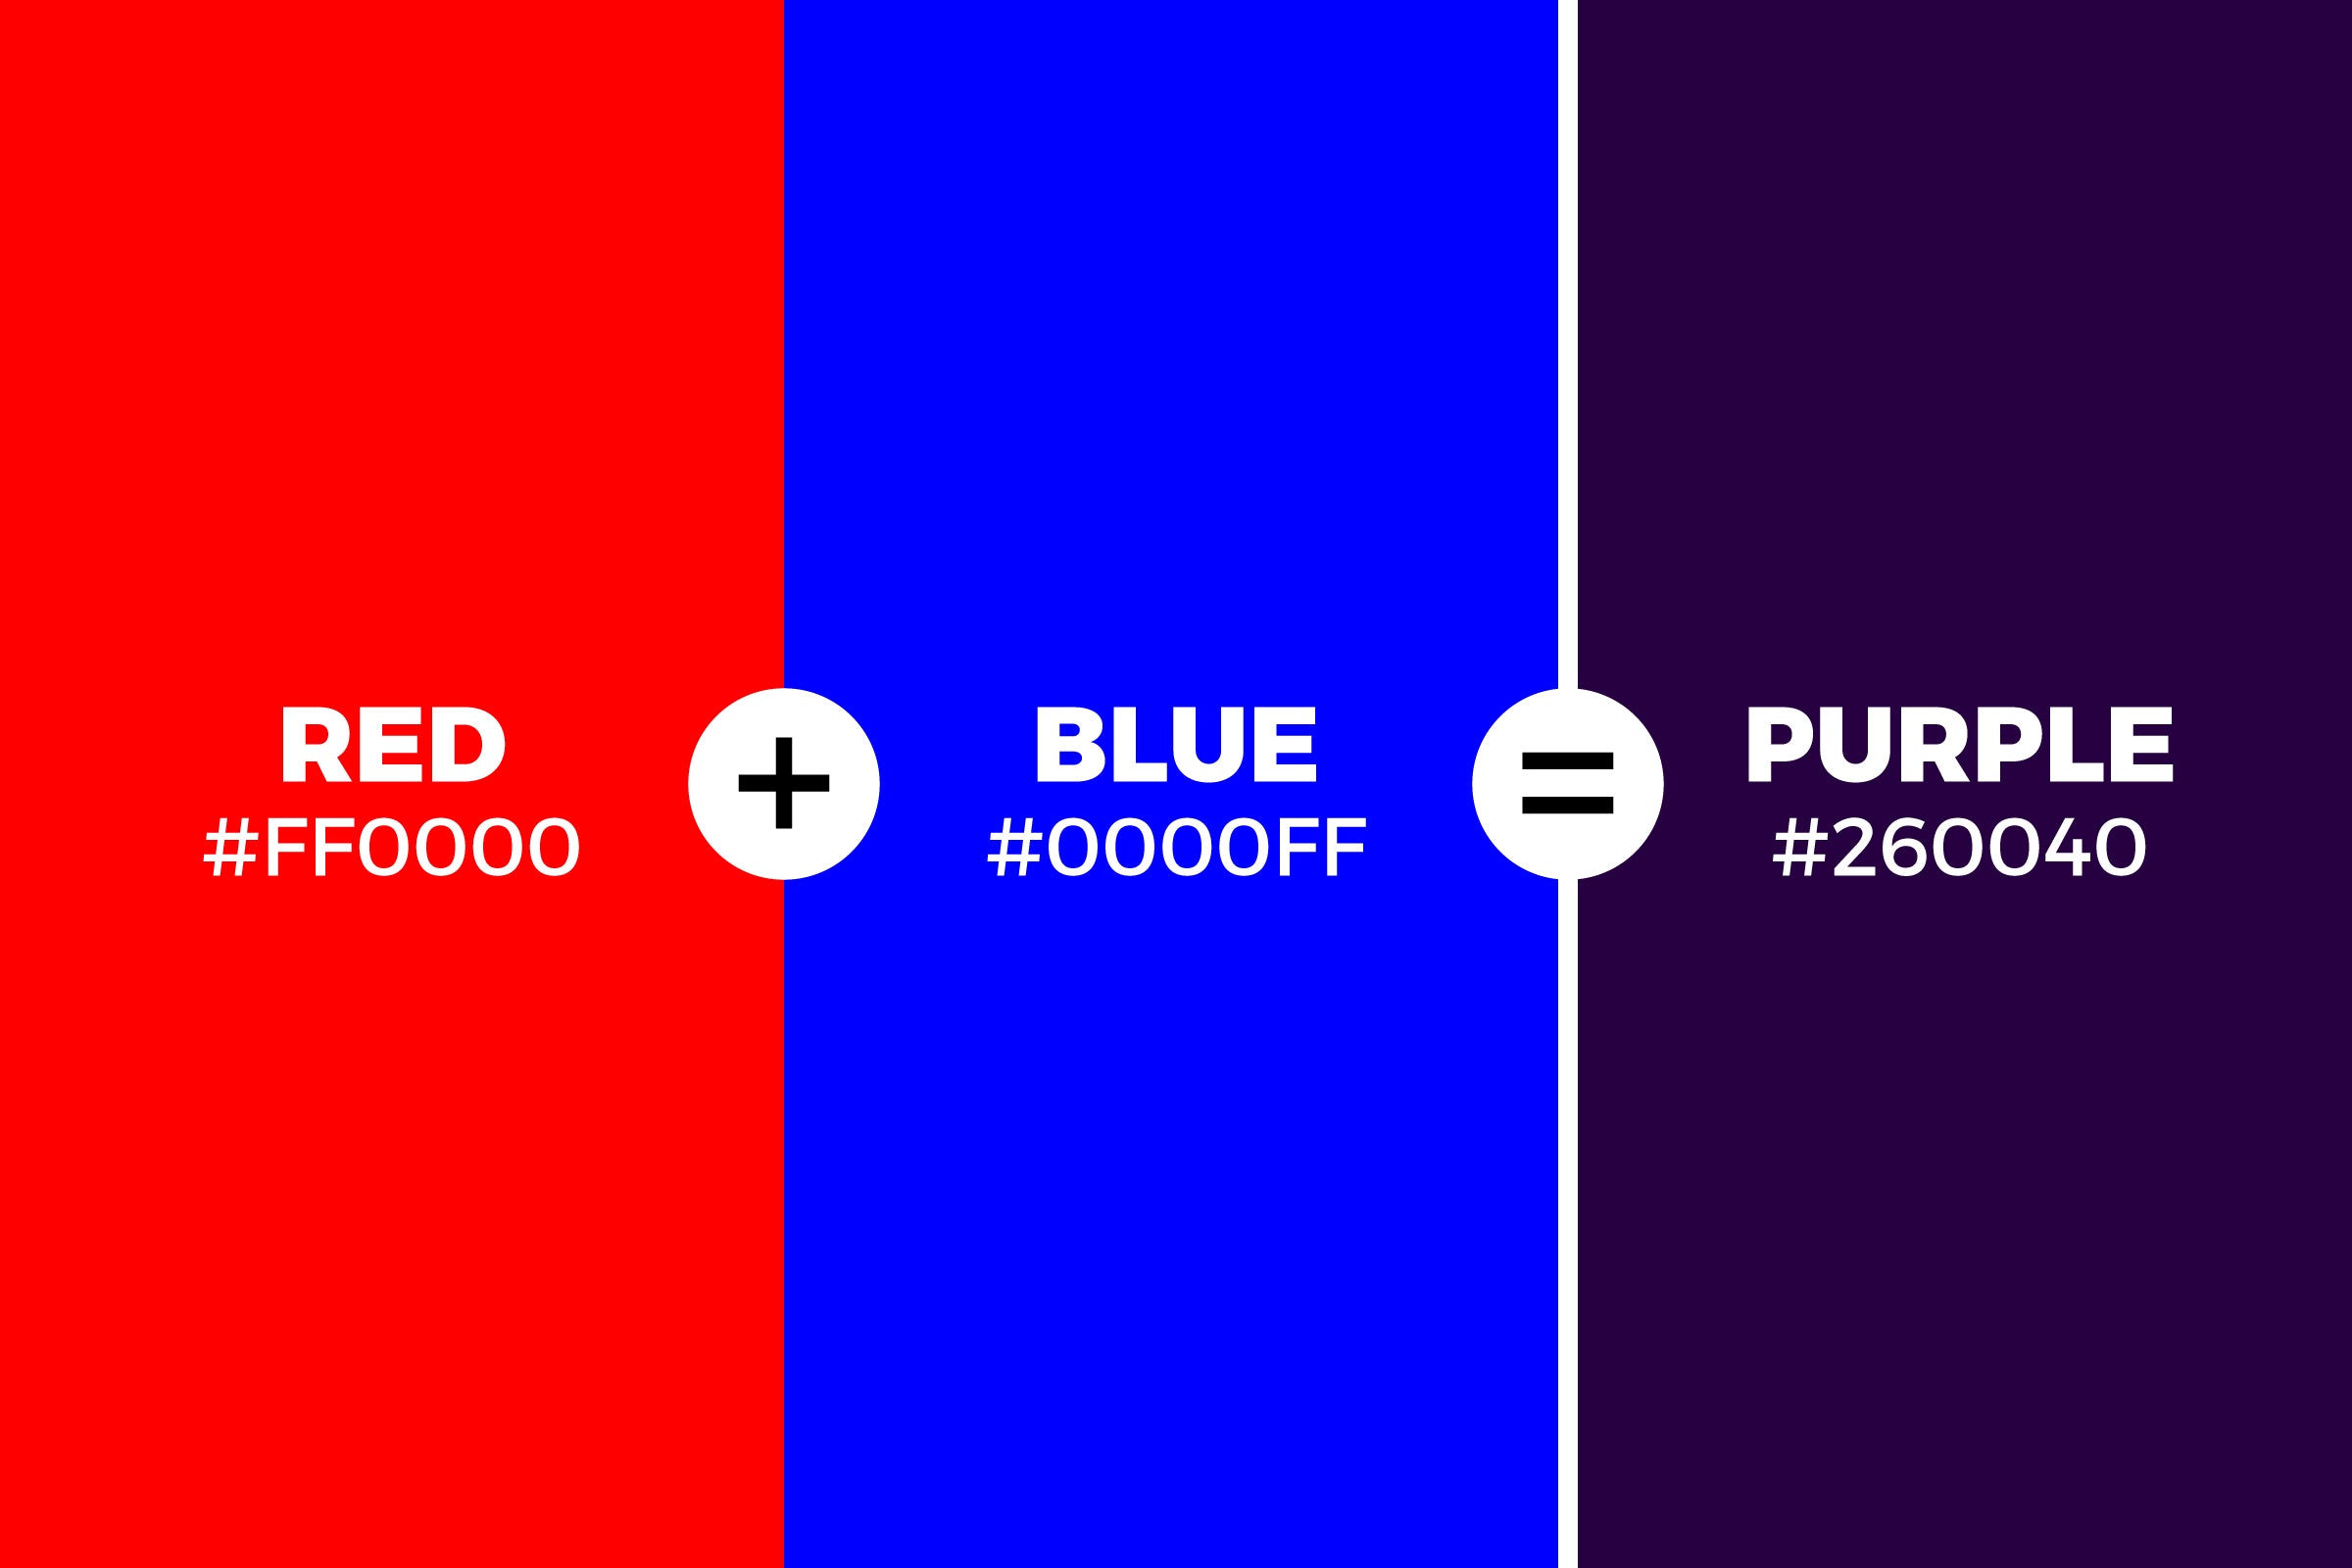 What Color Does Red and Blue Make When Mixed Together